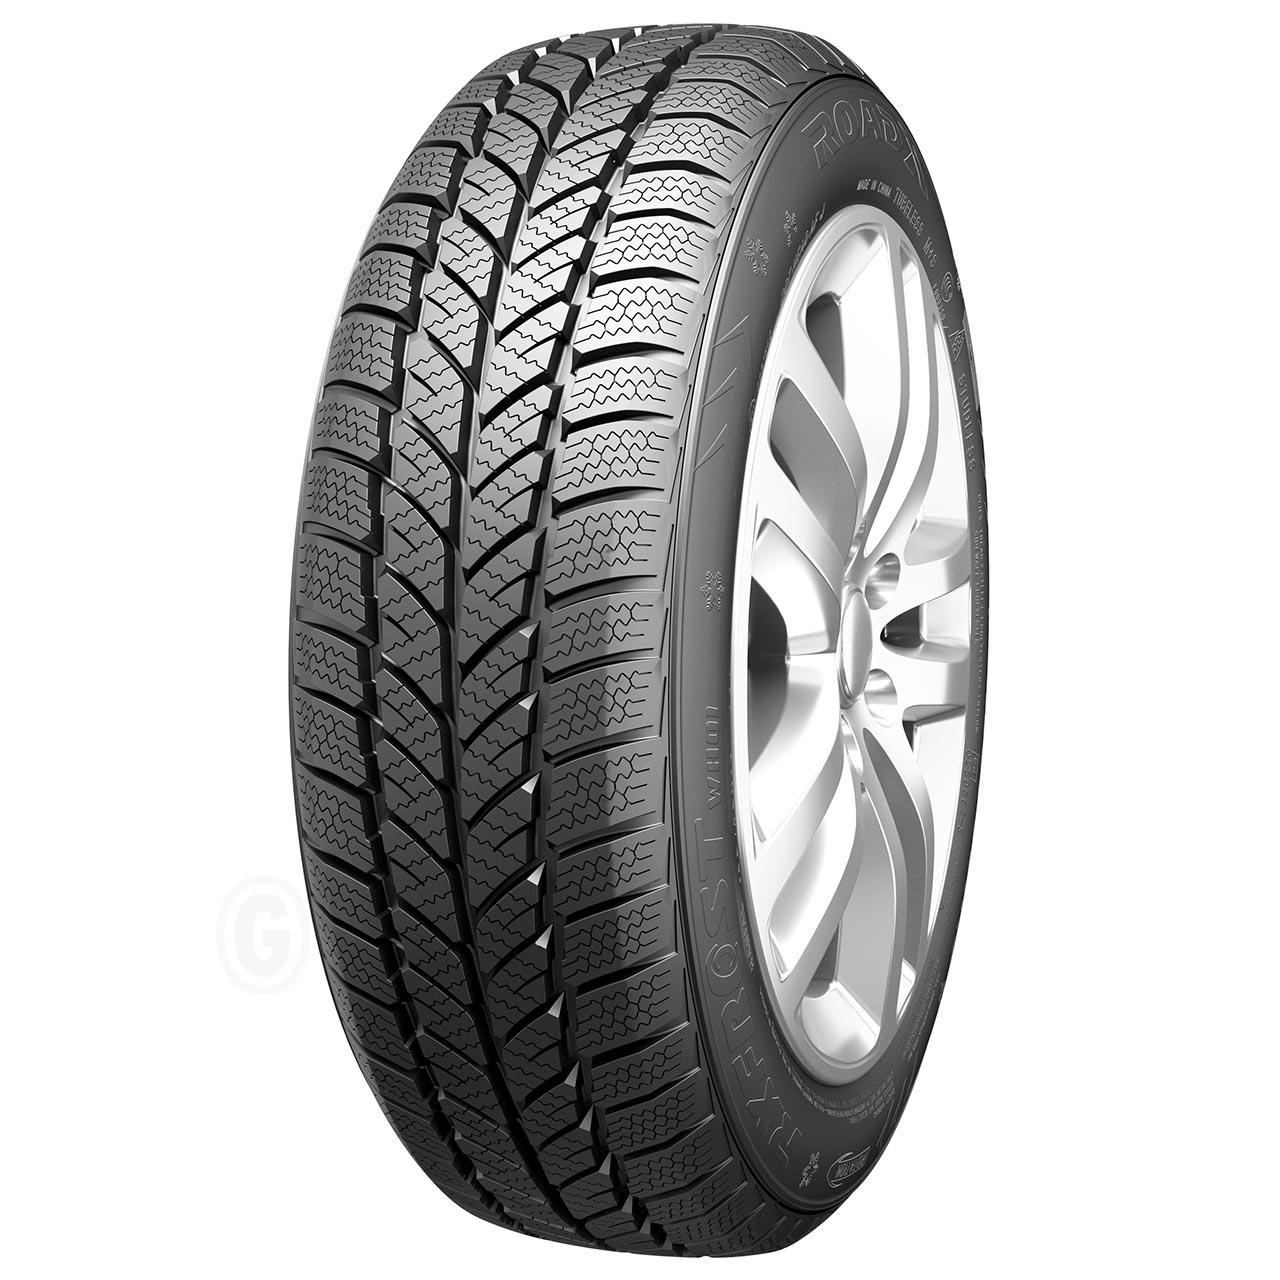 ROADX RX FROST WH01 175/65R15 88H BSW